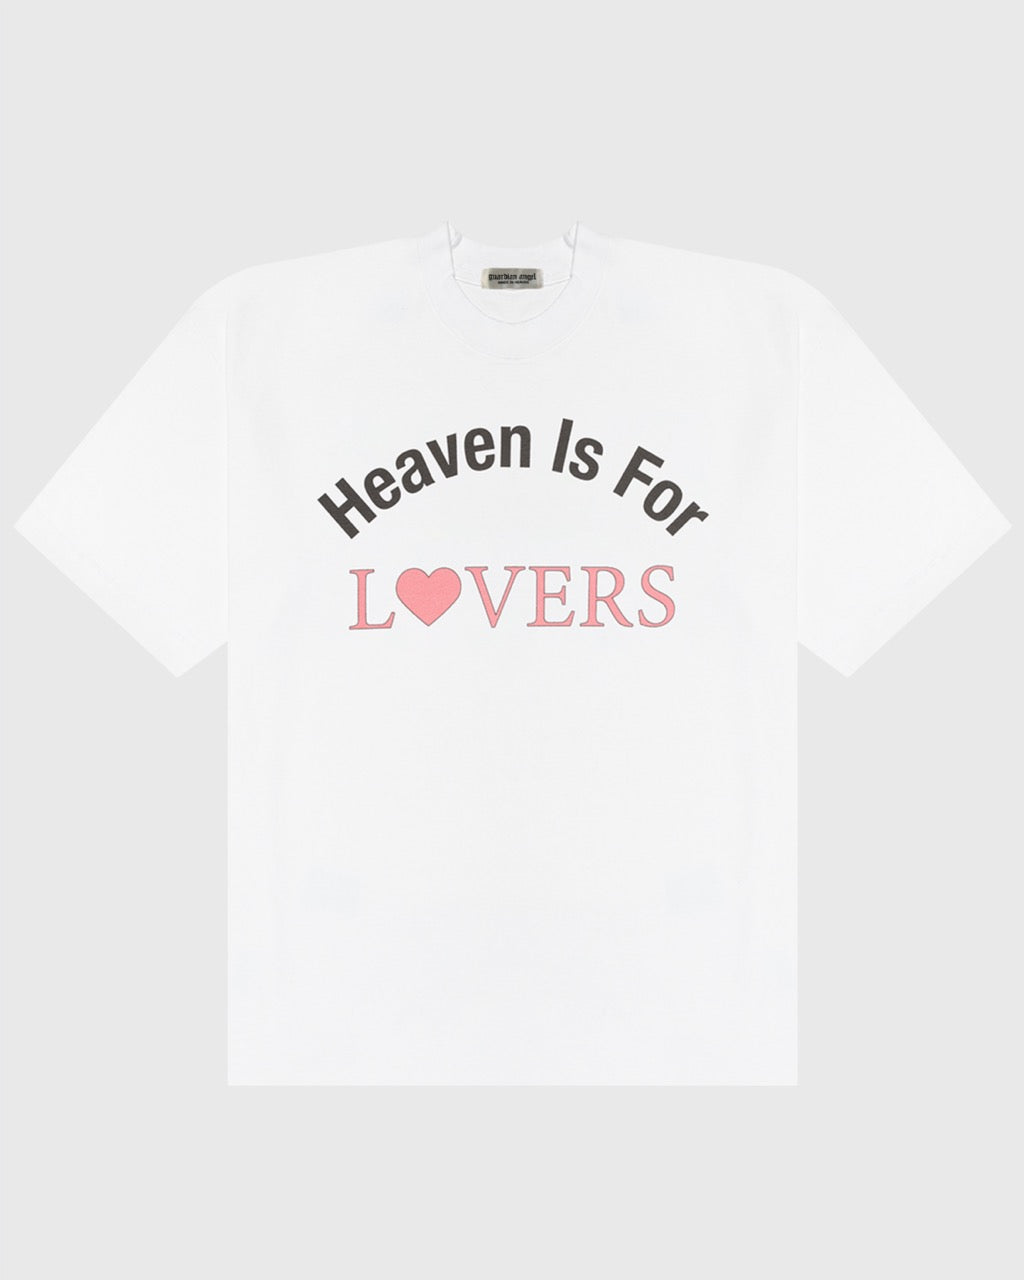 HEAVEN IS FOR LOVERS T-SHIRT